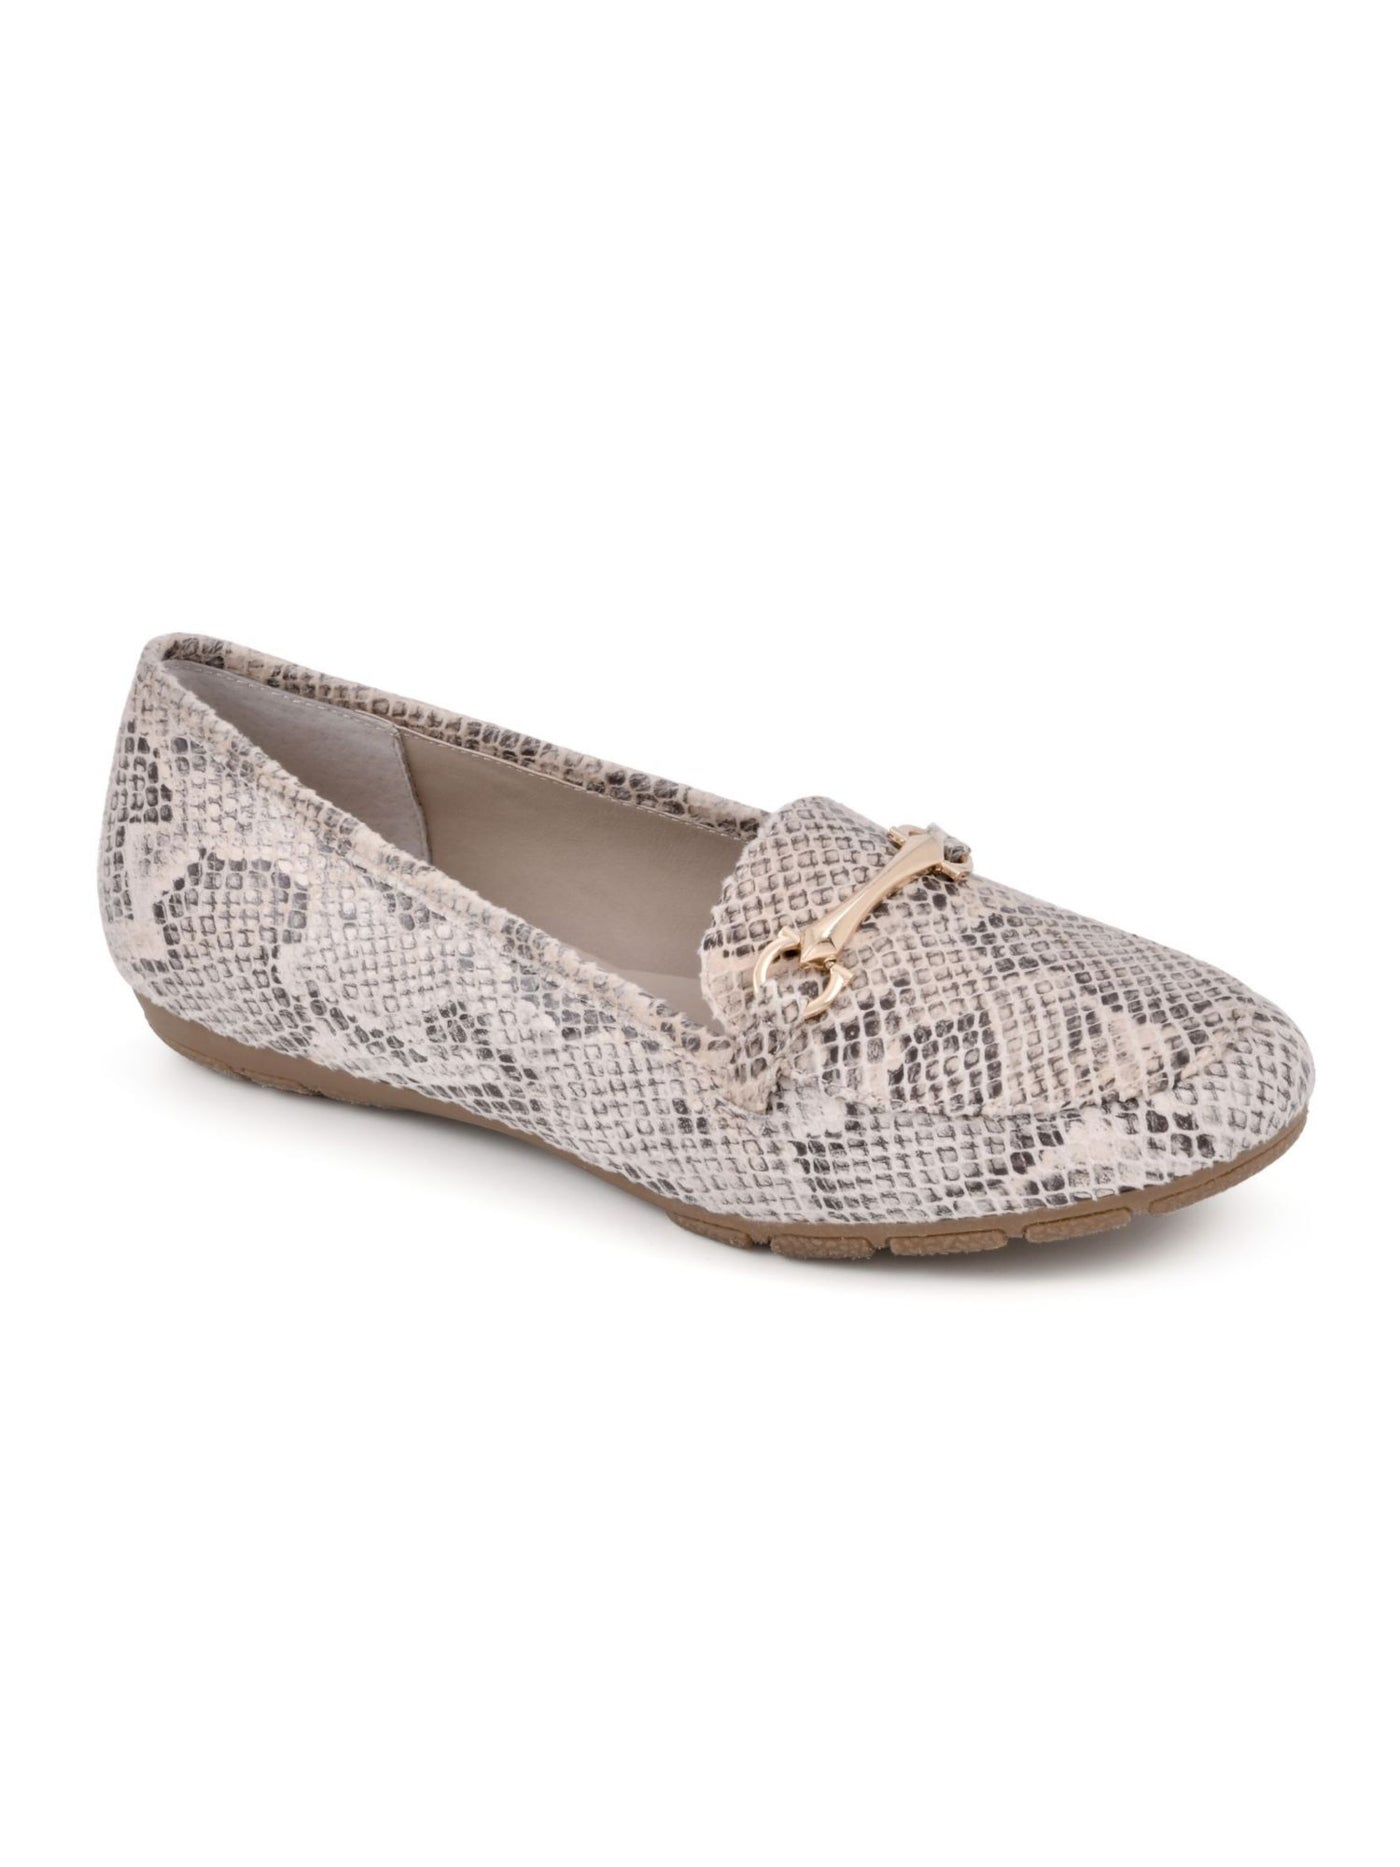 RIALTO Womens Beige Snake Print Metallic Bit Comfort Padded Treaded Guiding Round Toe Slip On Loafers Shoes 11 W